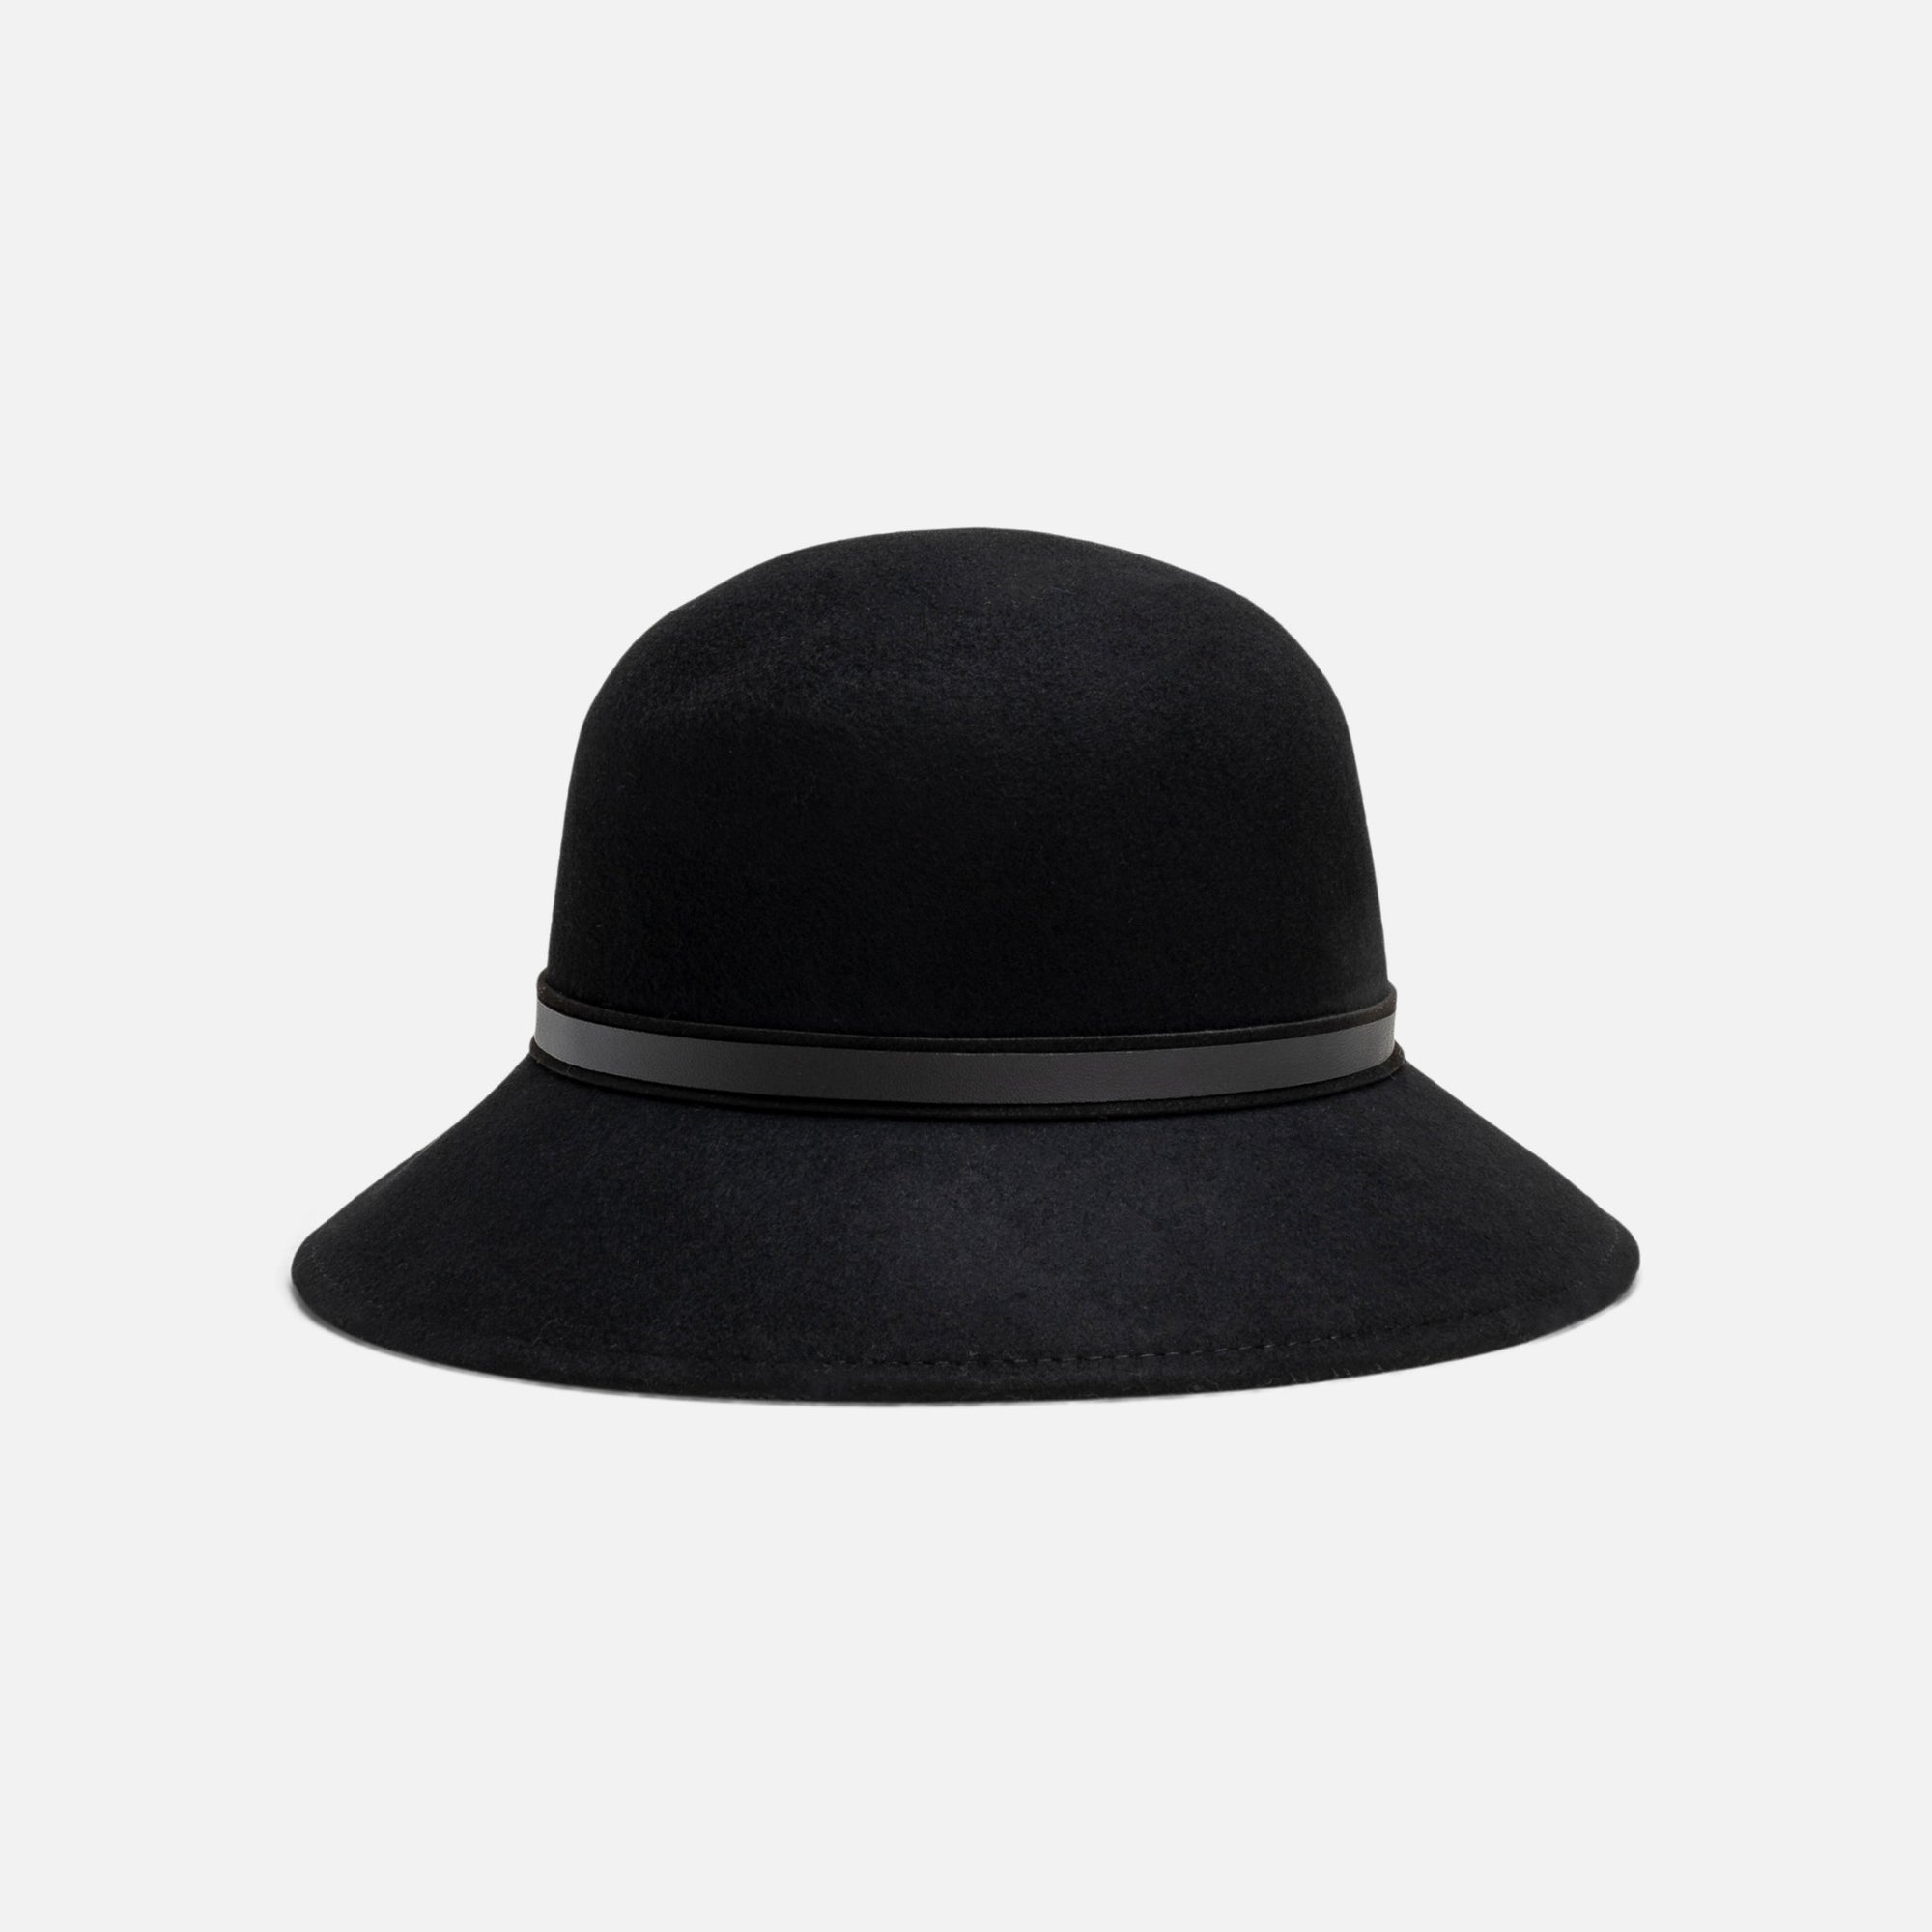 Black cloche hat with black leather band